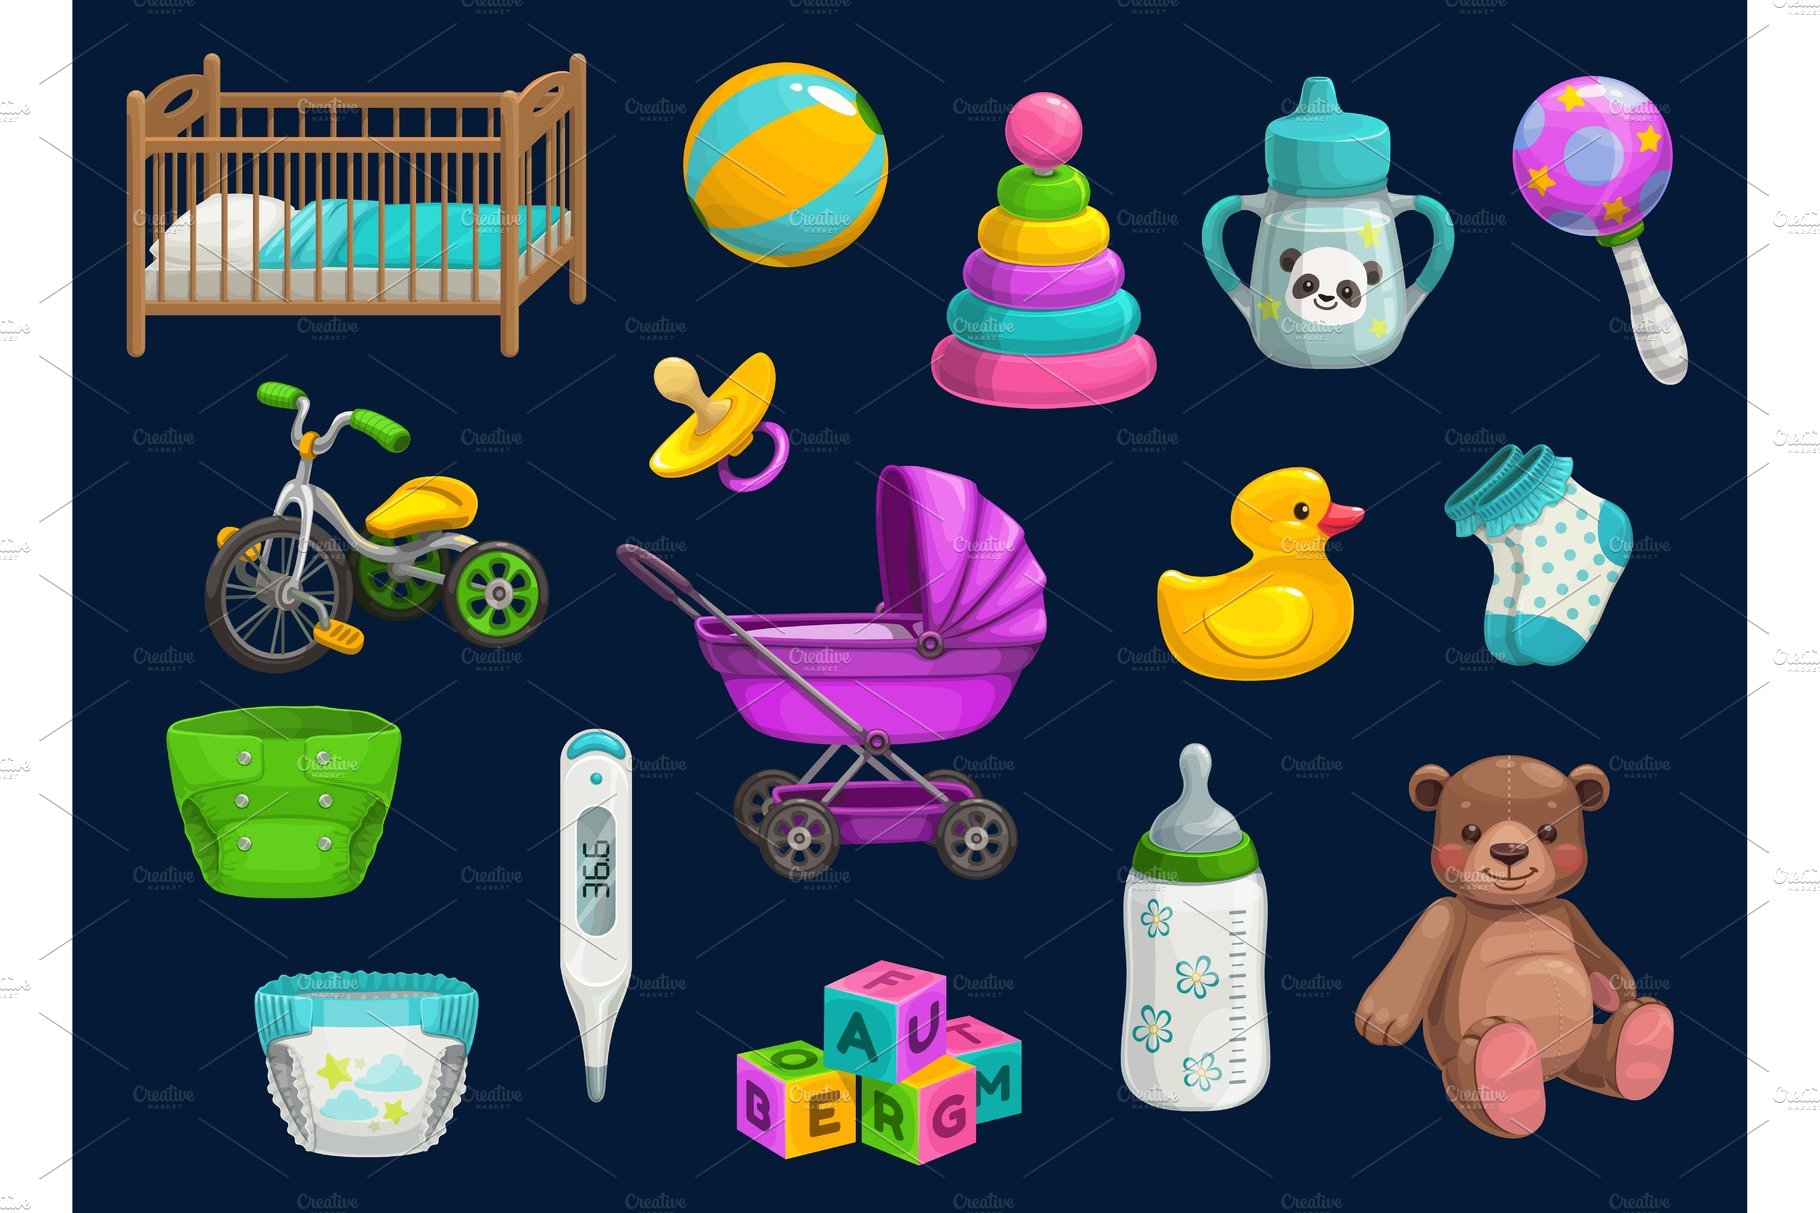 Baby bottle, toy, rattle, stroller cover image.